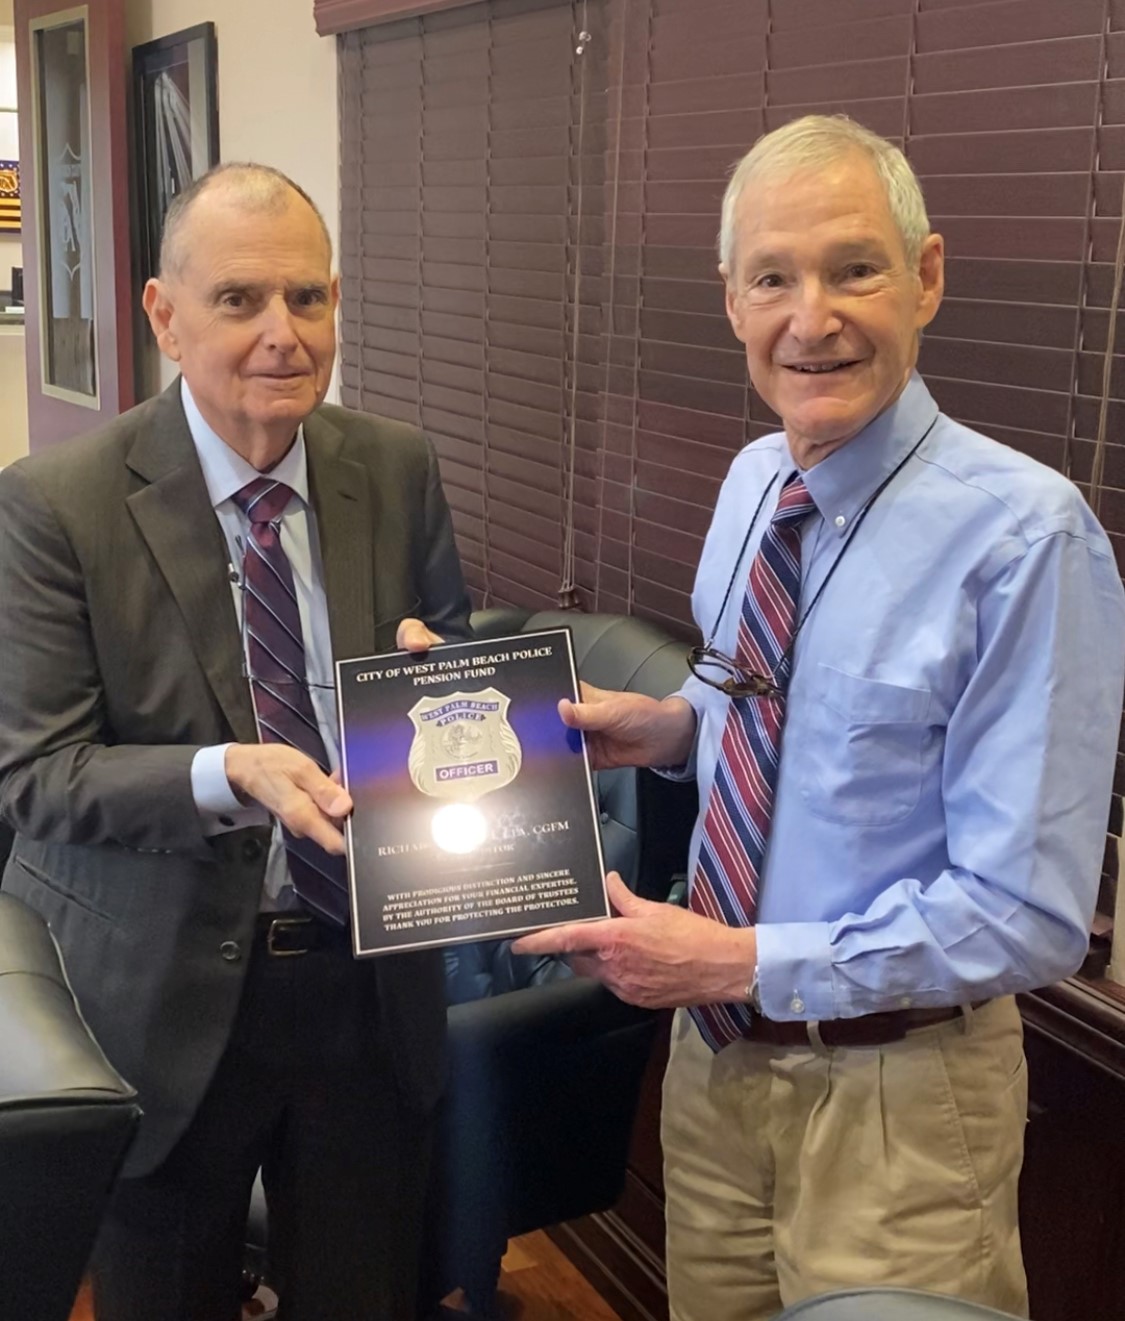 August 13, 2021: On behalf of the Board of Trustees, Chairman Jack Frost (R) presented Mr. Richard Cristini (L) with a token of appreciation for his professional services rendered during the Plan Audits.